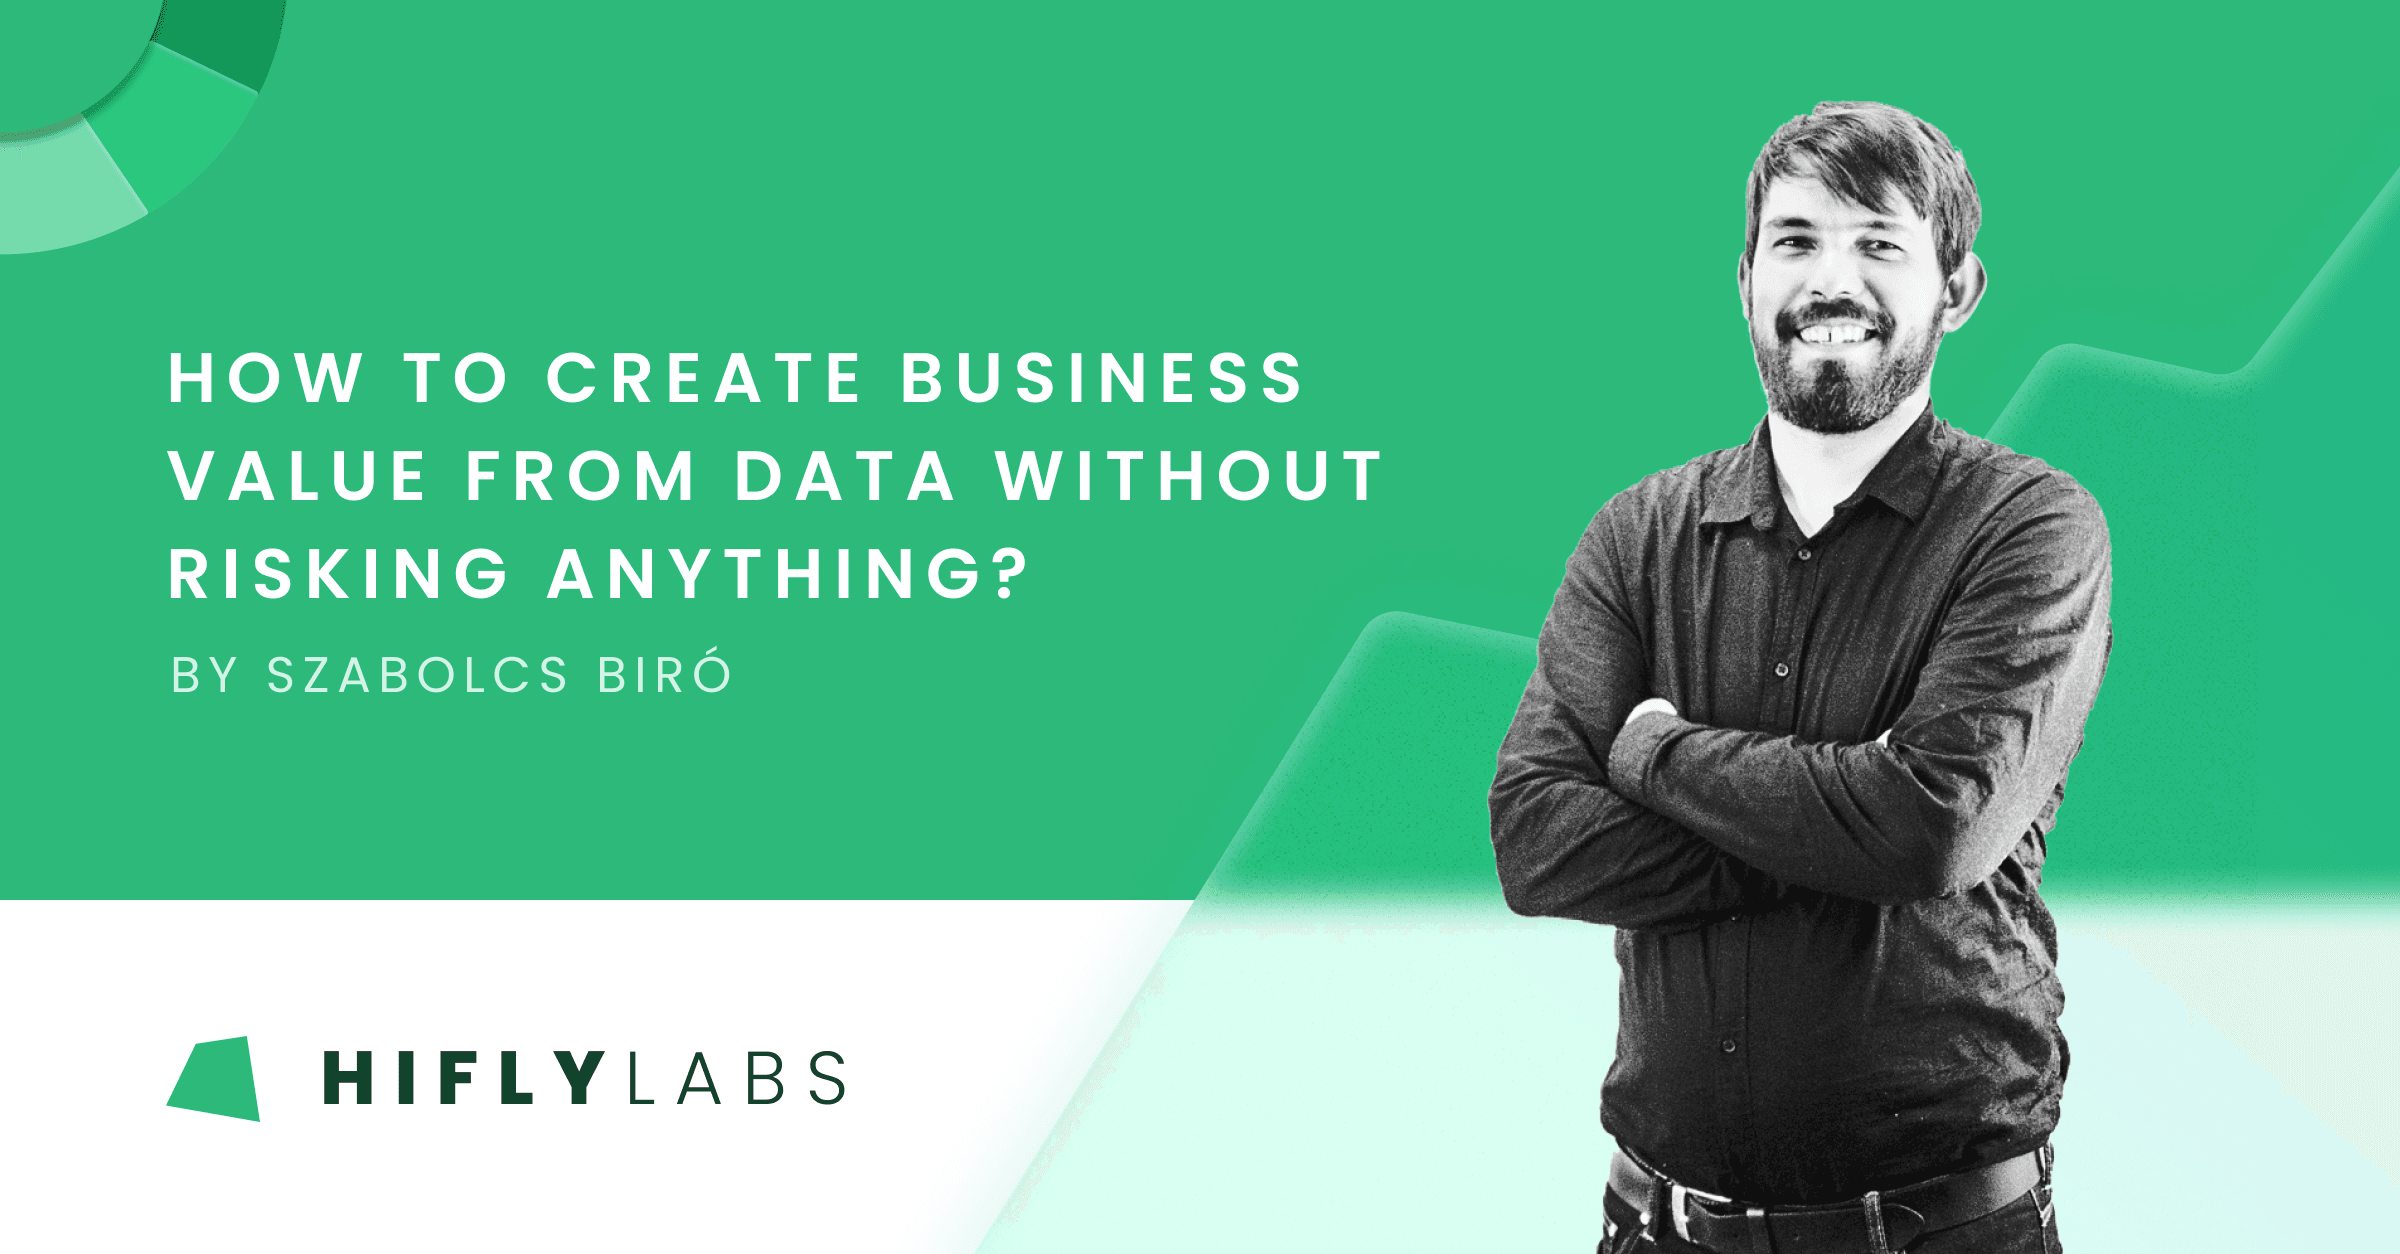 How to Create Business Value from Data Without Risking Anything?